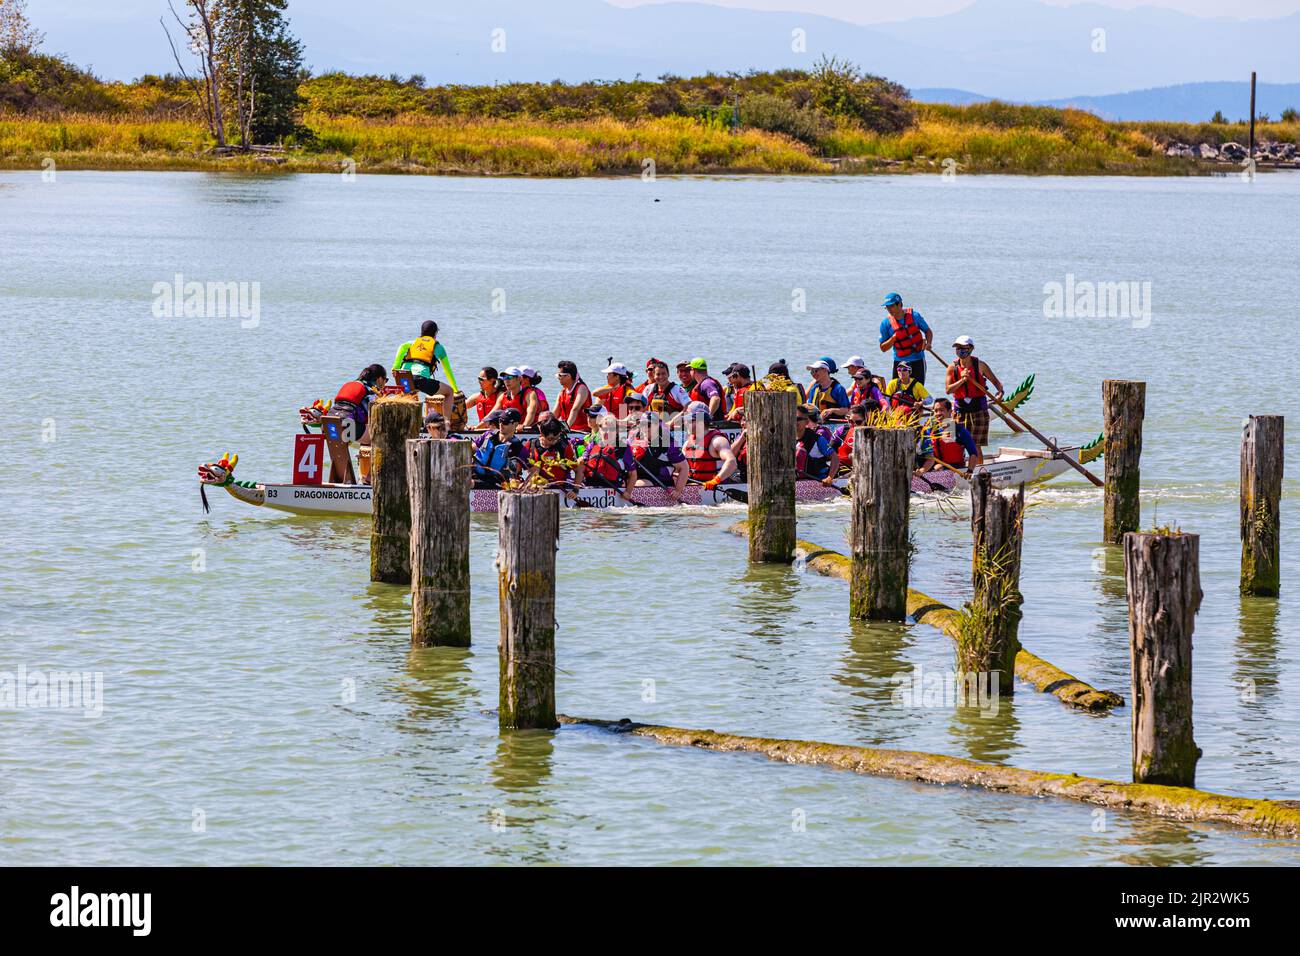 Dragon Boat teams making their way to the starting line at the 2022 Steveston Dragon Boat Festival in British Columbia Canada Stock Photo